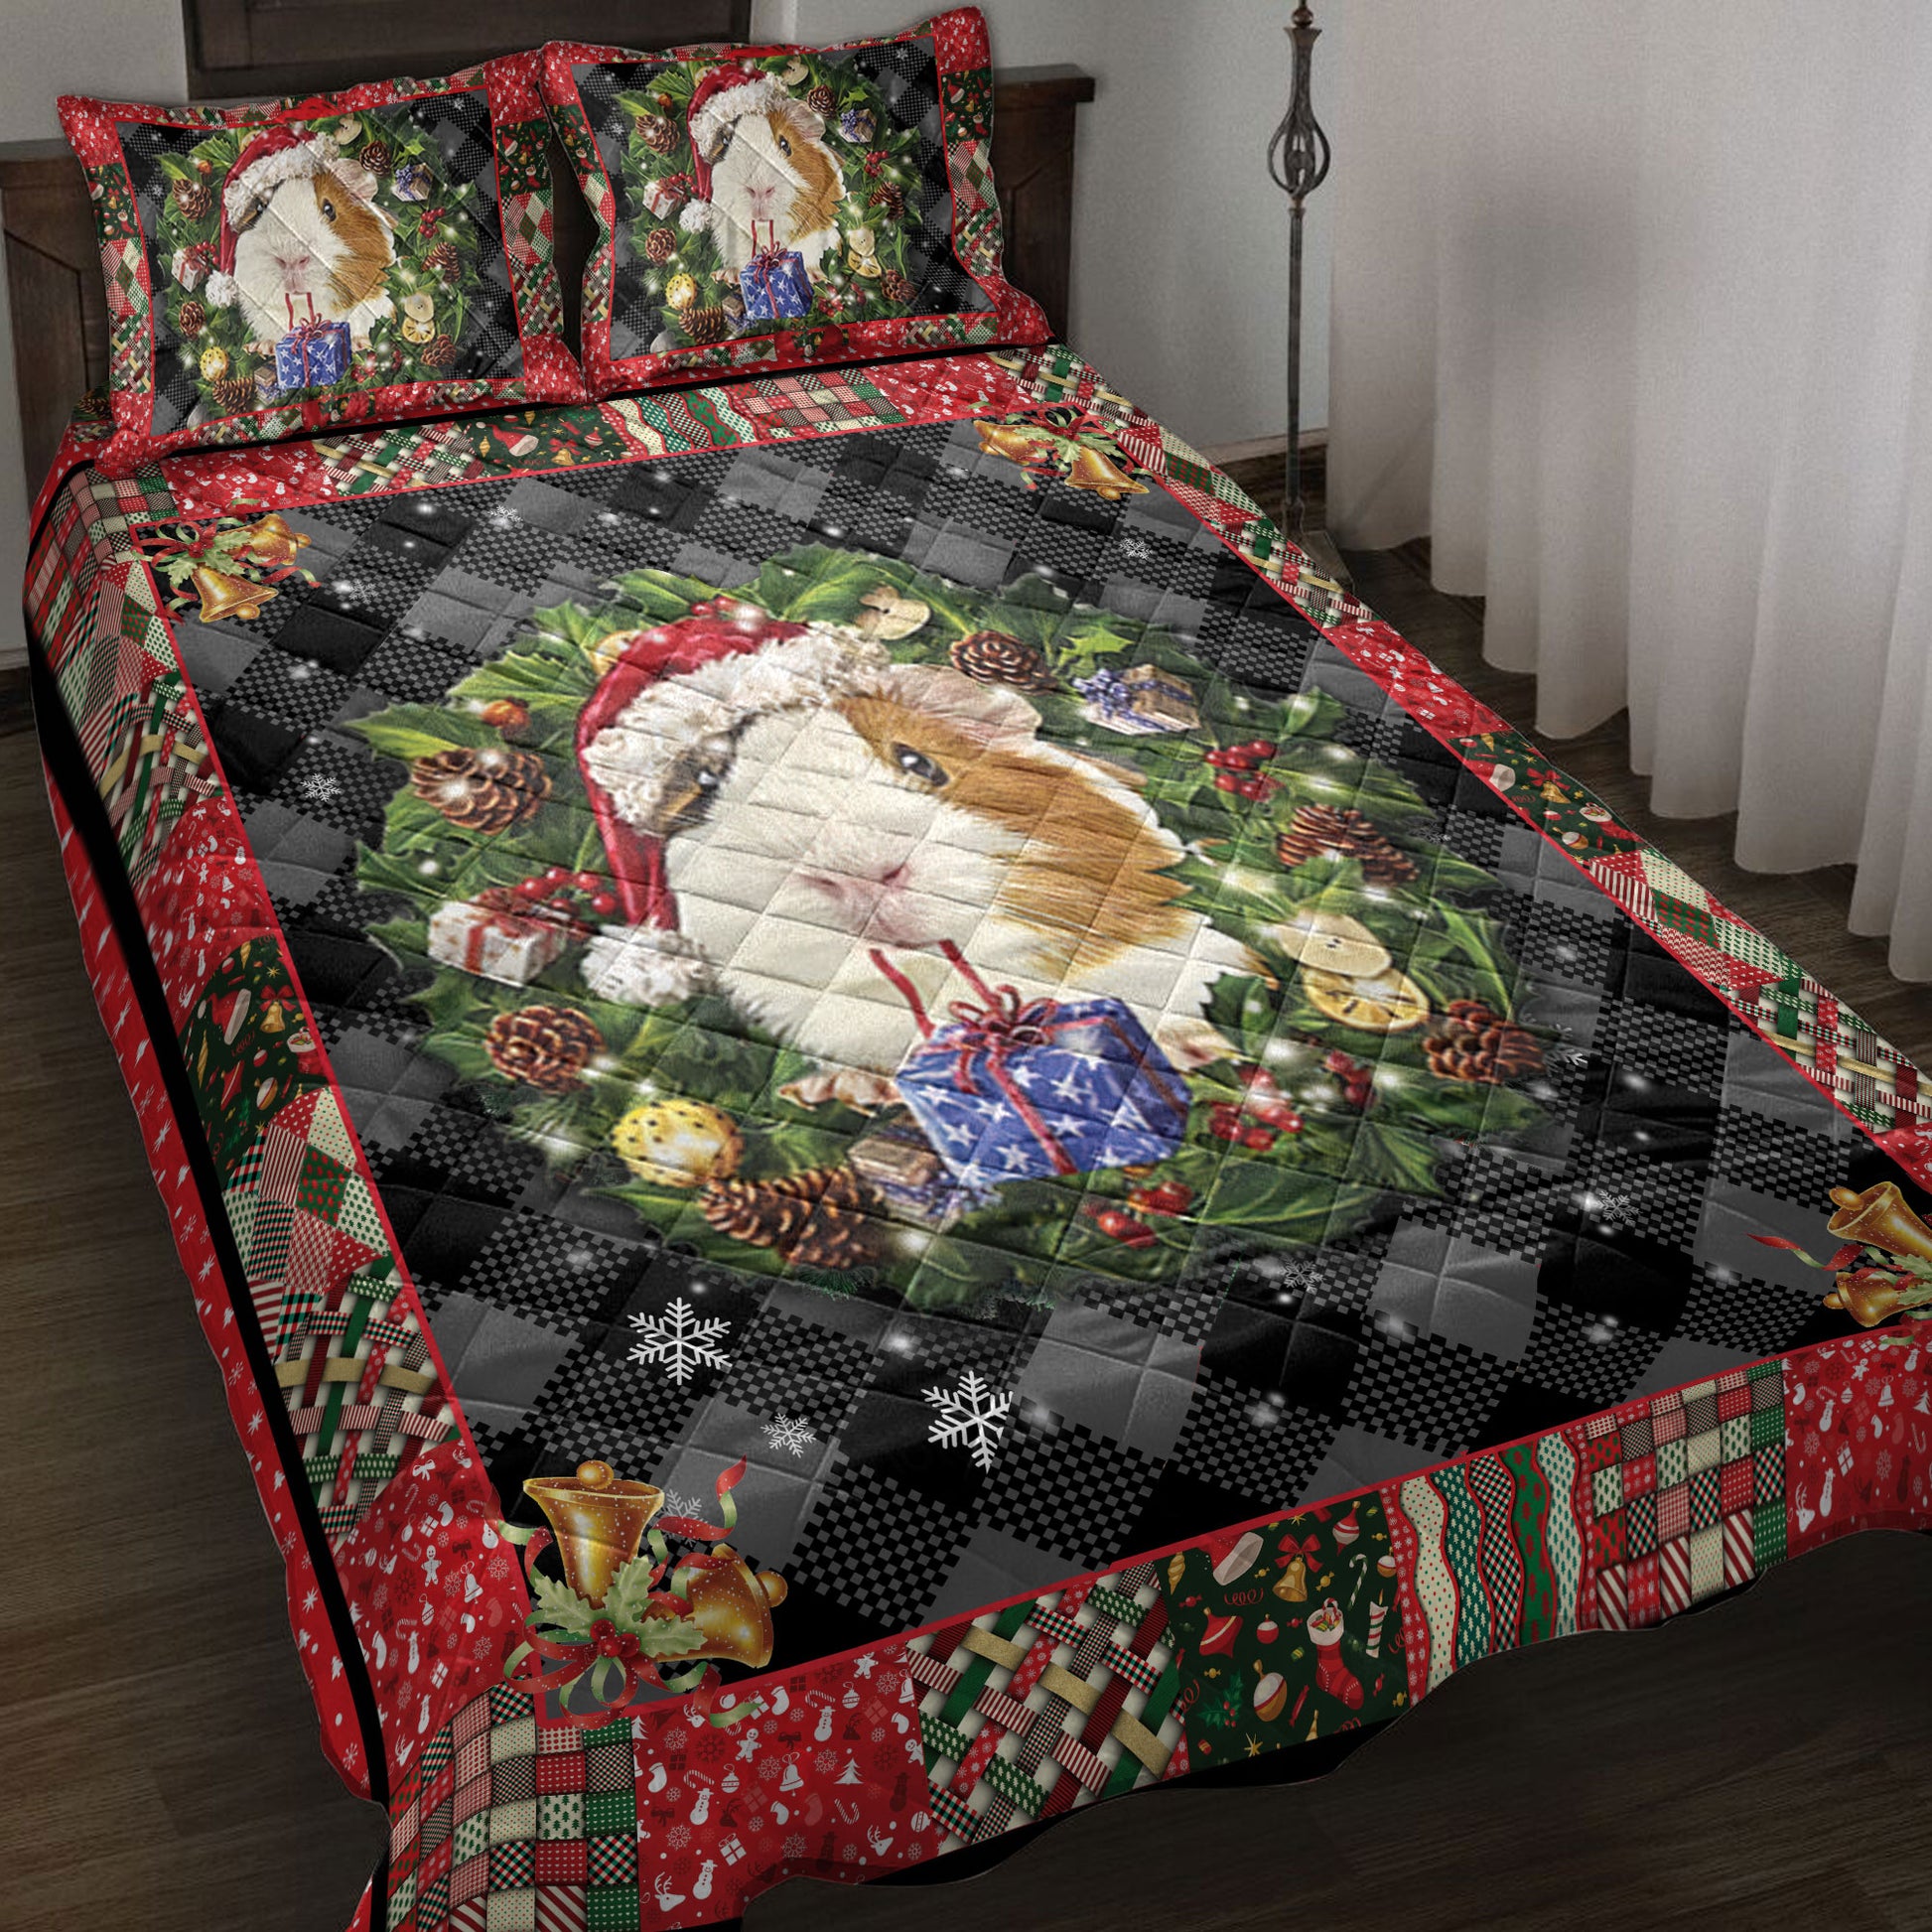 Ohaprints-Quilt-Bed-Set-Pillowcase-Guinea-Pig-Wearing-Christmas-Hat-String-Lights-Unique-Gift-Blanket-Bedspread-Bedding-4055-Throw (55'' x 60'')